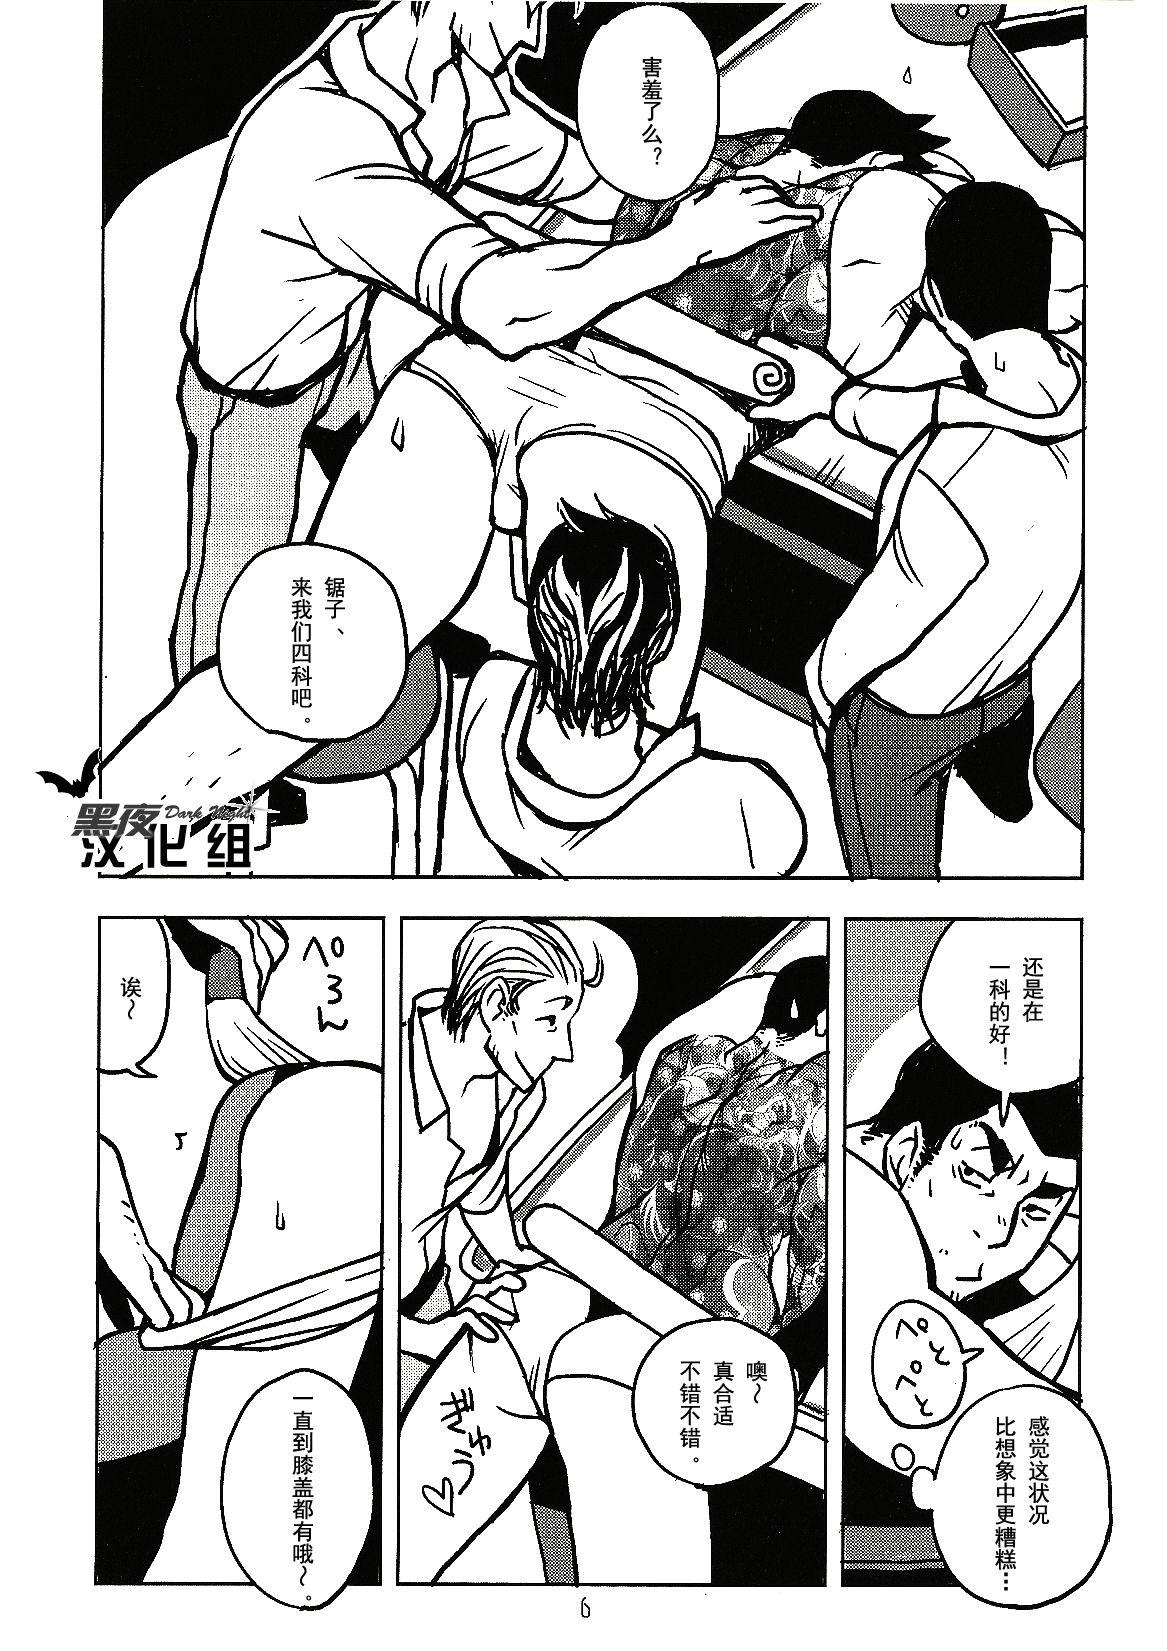 Solo Female Naisho no Shimatsusho | 秘密的检讨书 - Ace attorney Wives - Page 6